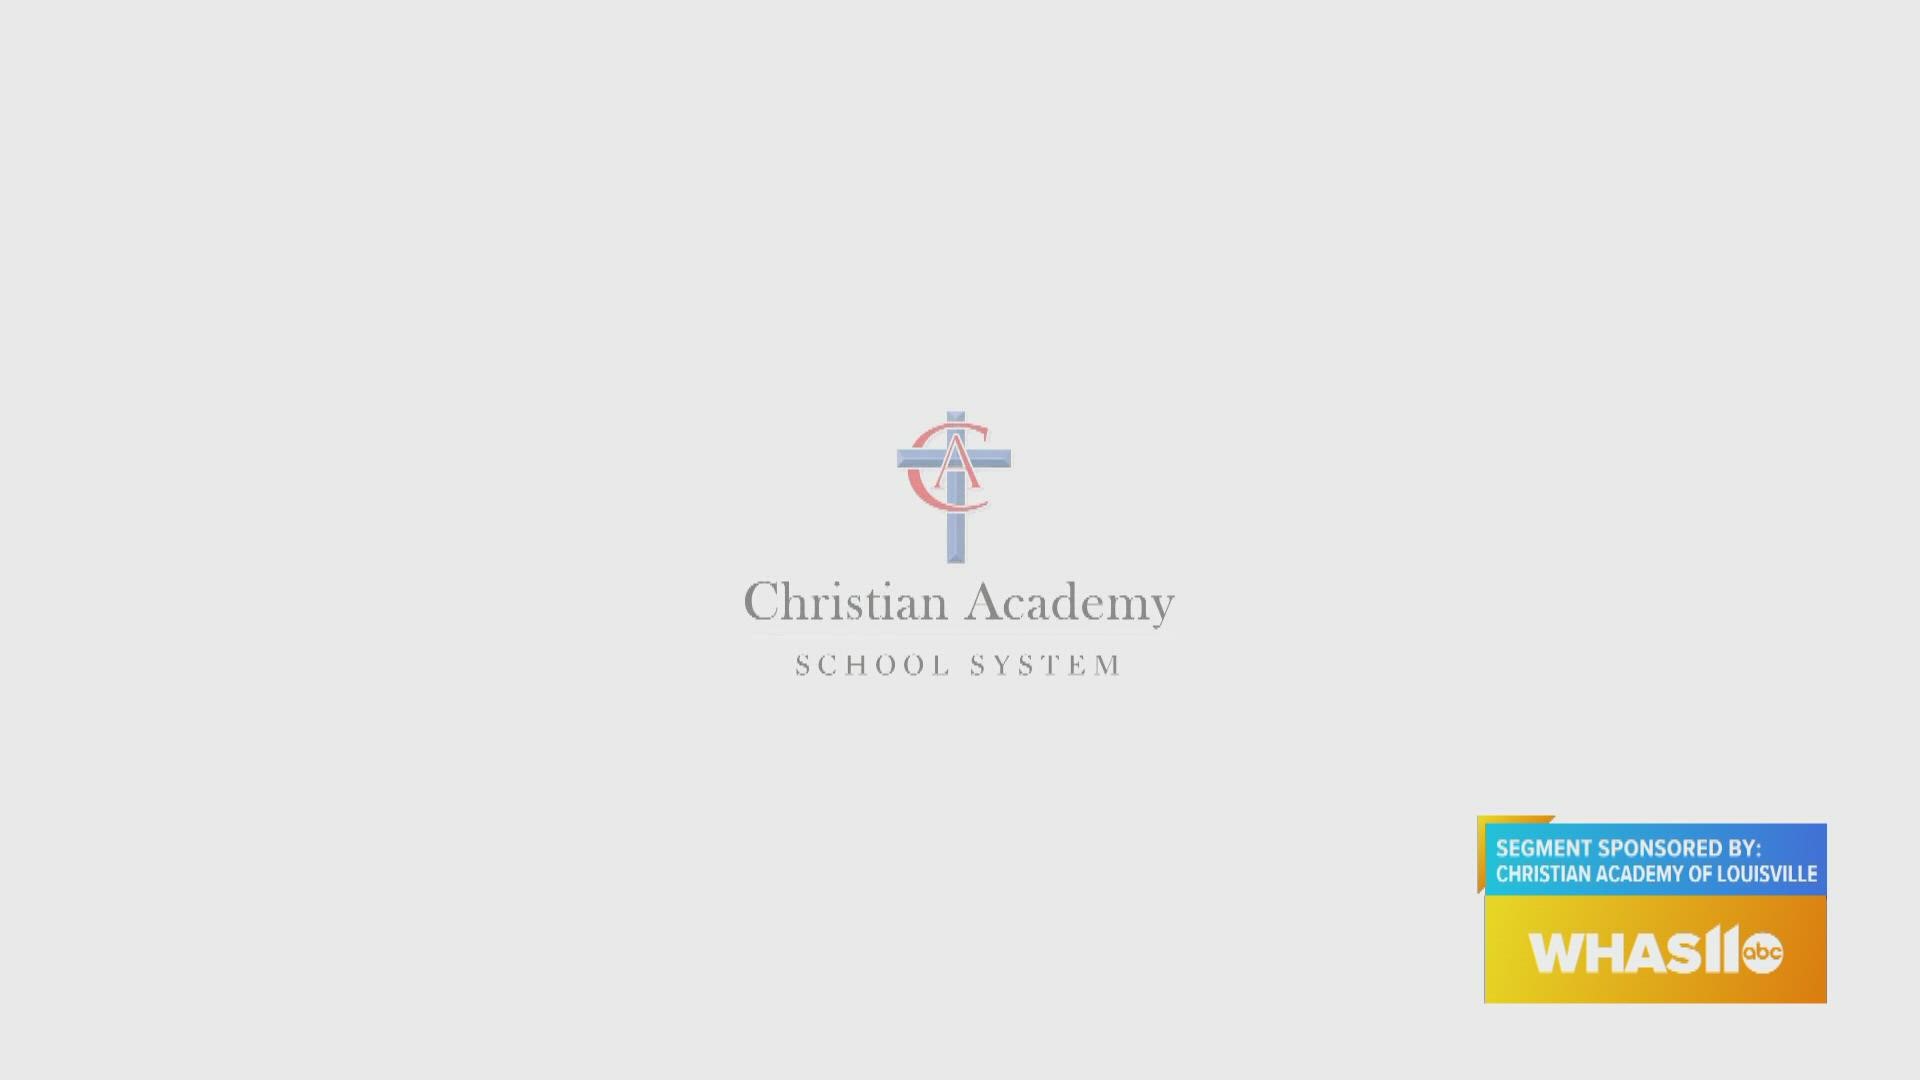 To learn more about Christian Academy School System, visit caschools.us.